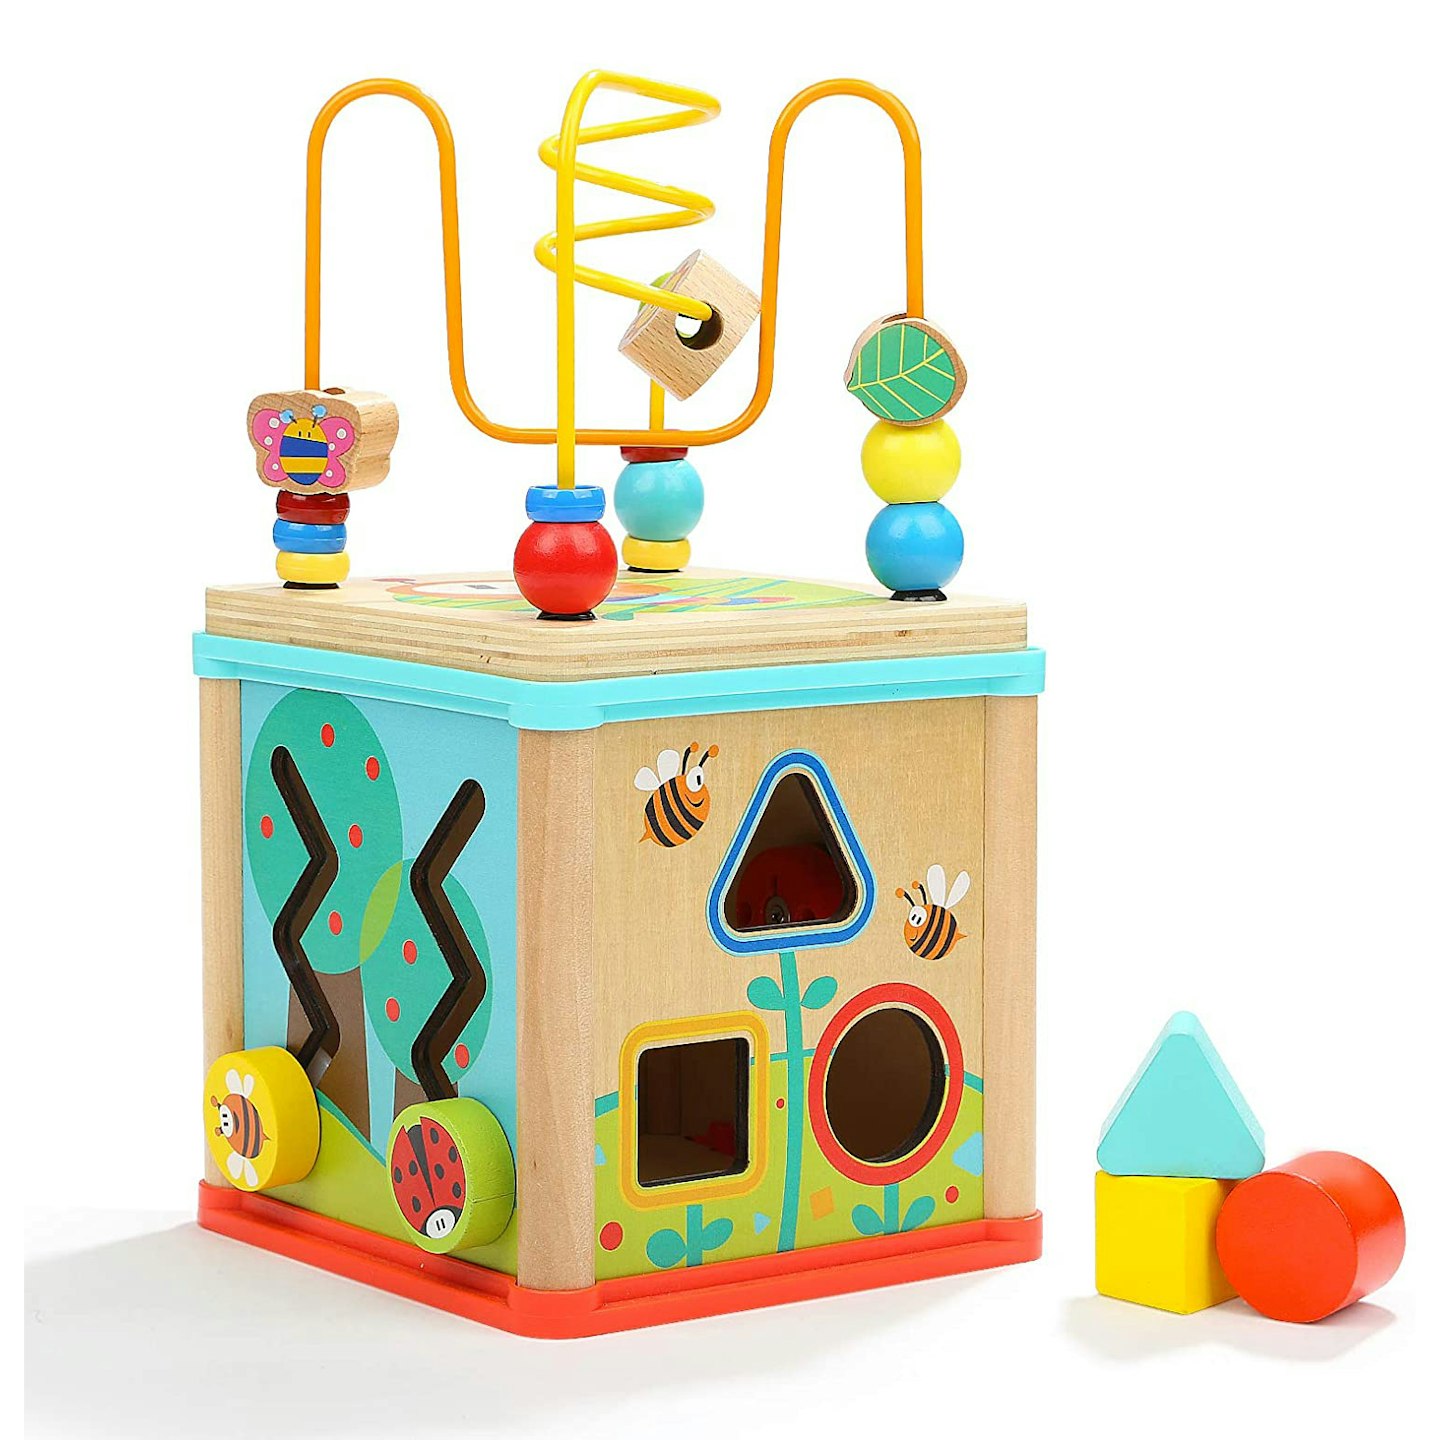 Top Bright Educational Activity Cube